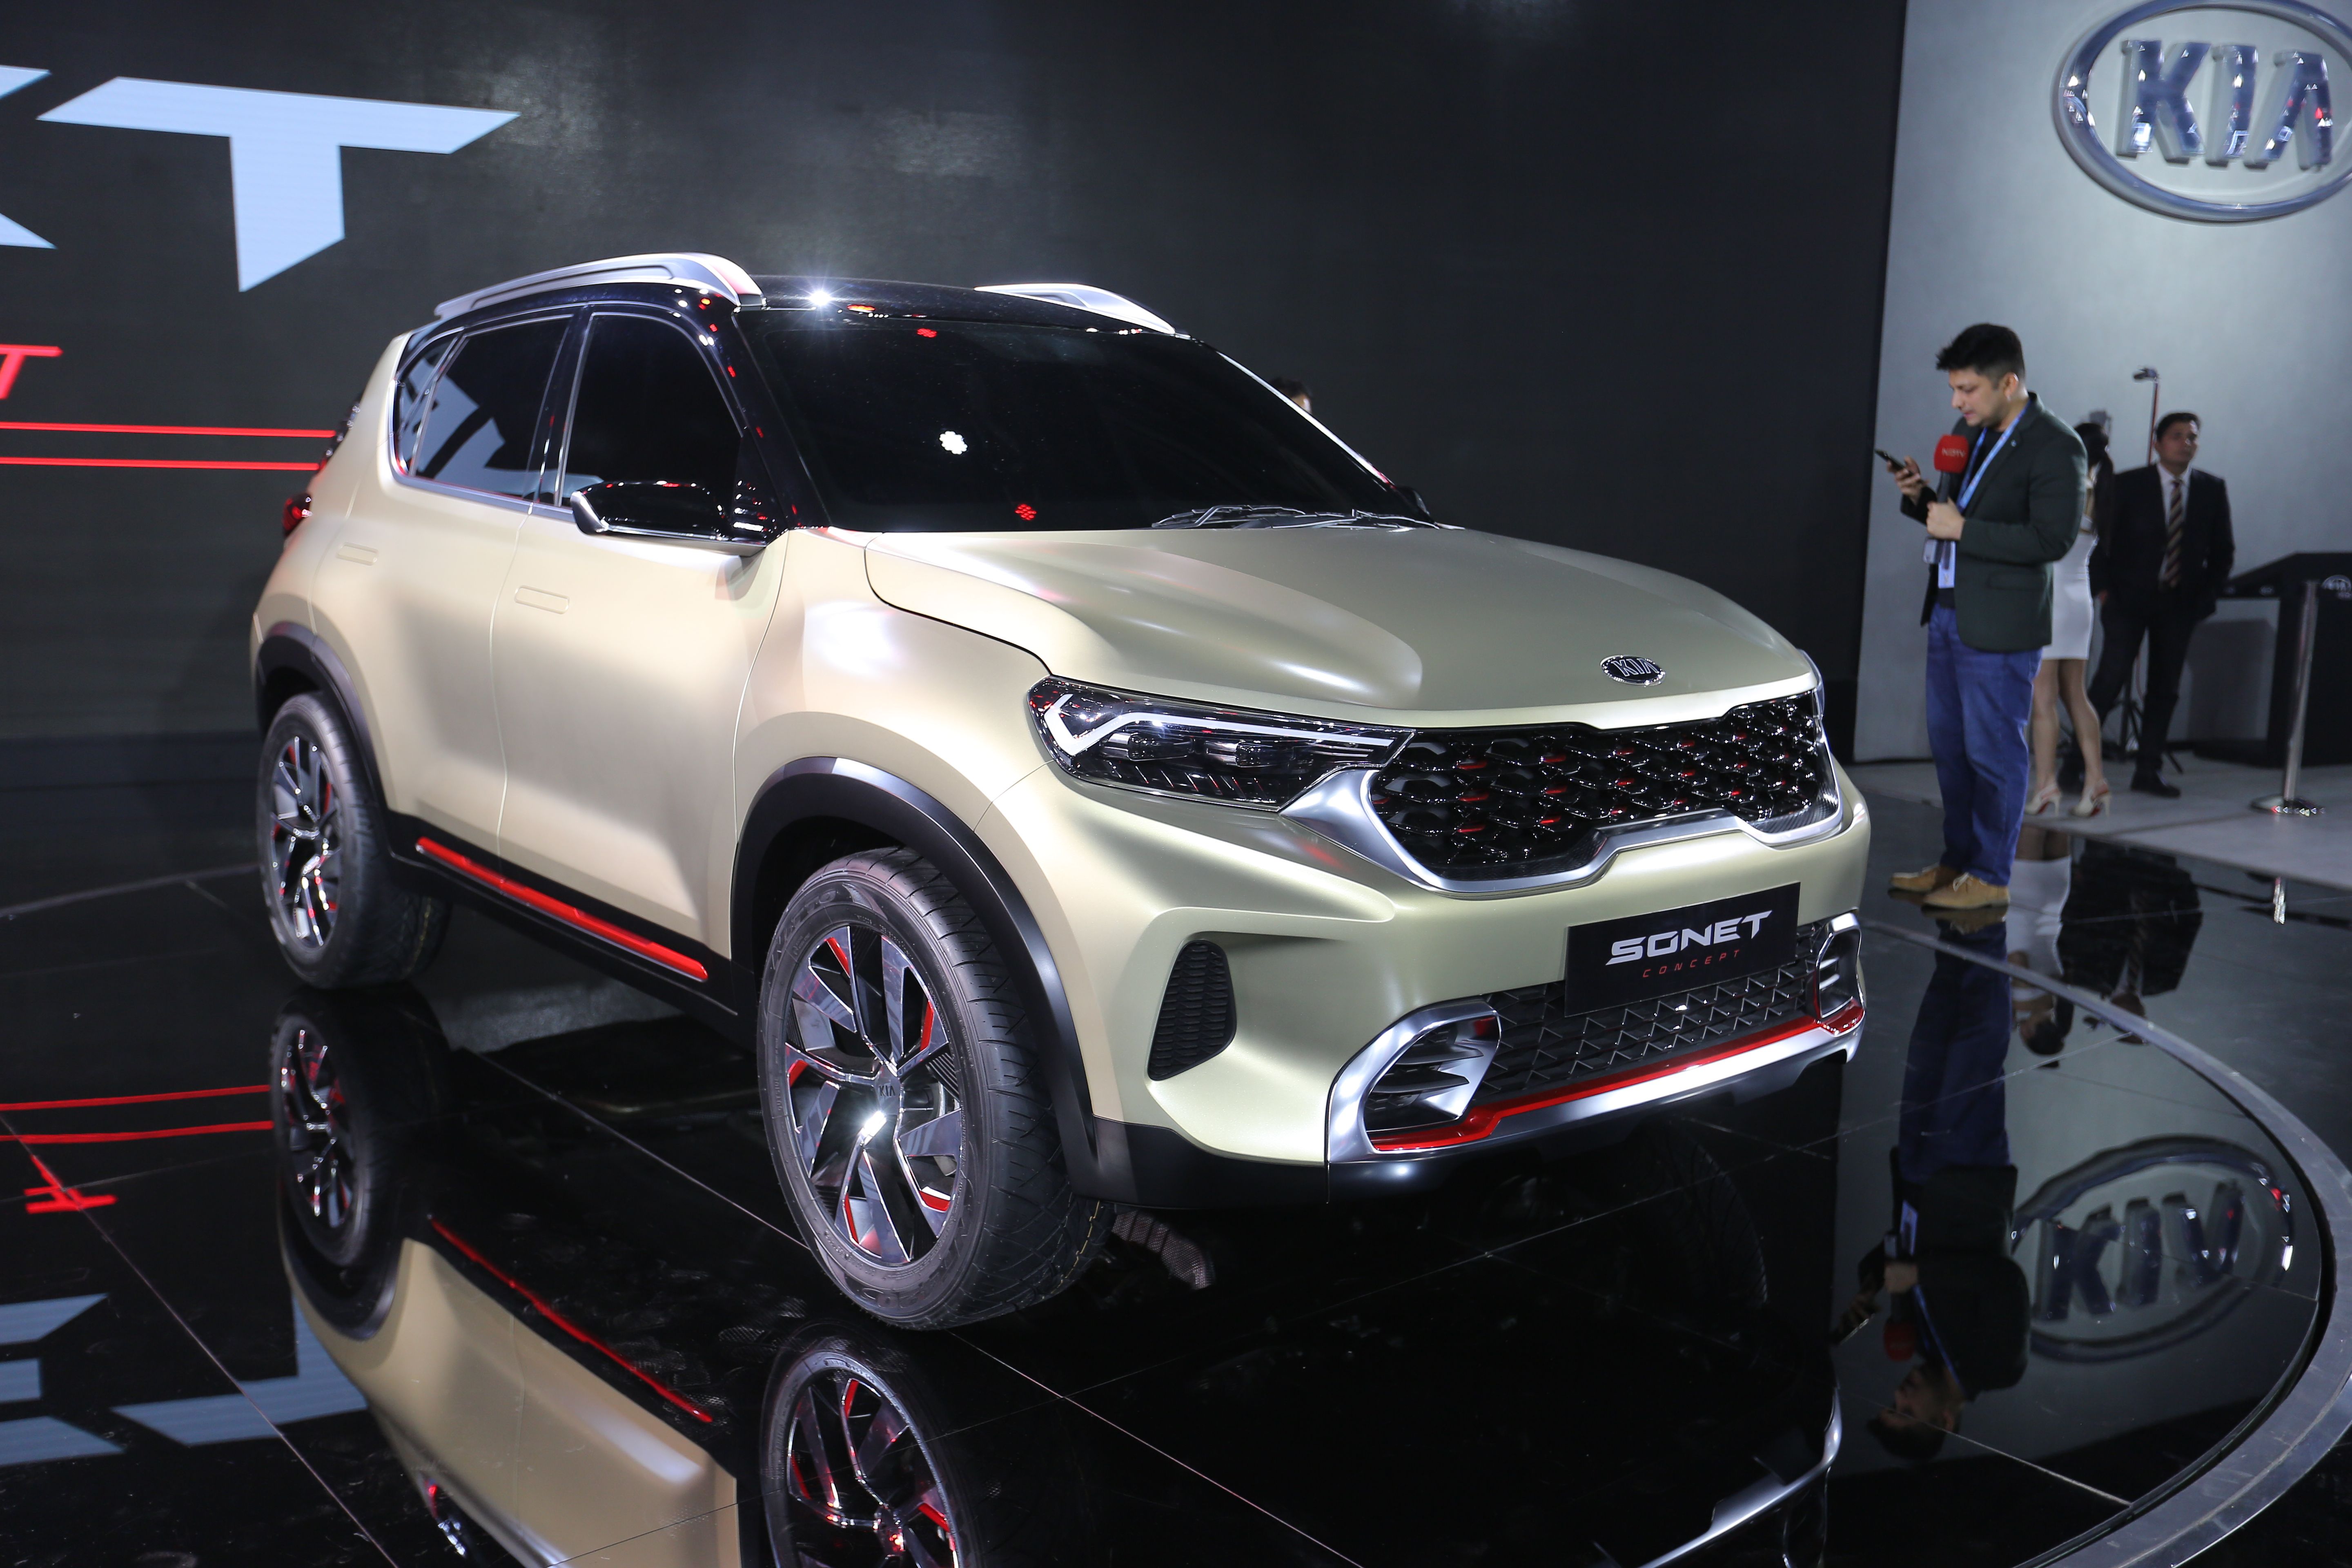 Kia Sonet Sub 4m SUV Spotted Partially Uncovered Ahead Of 